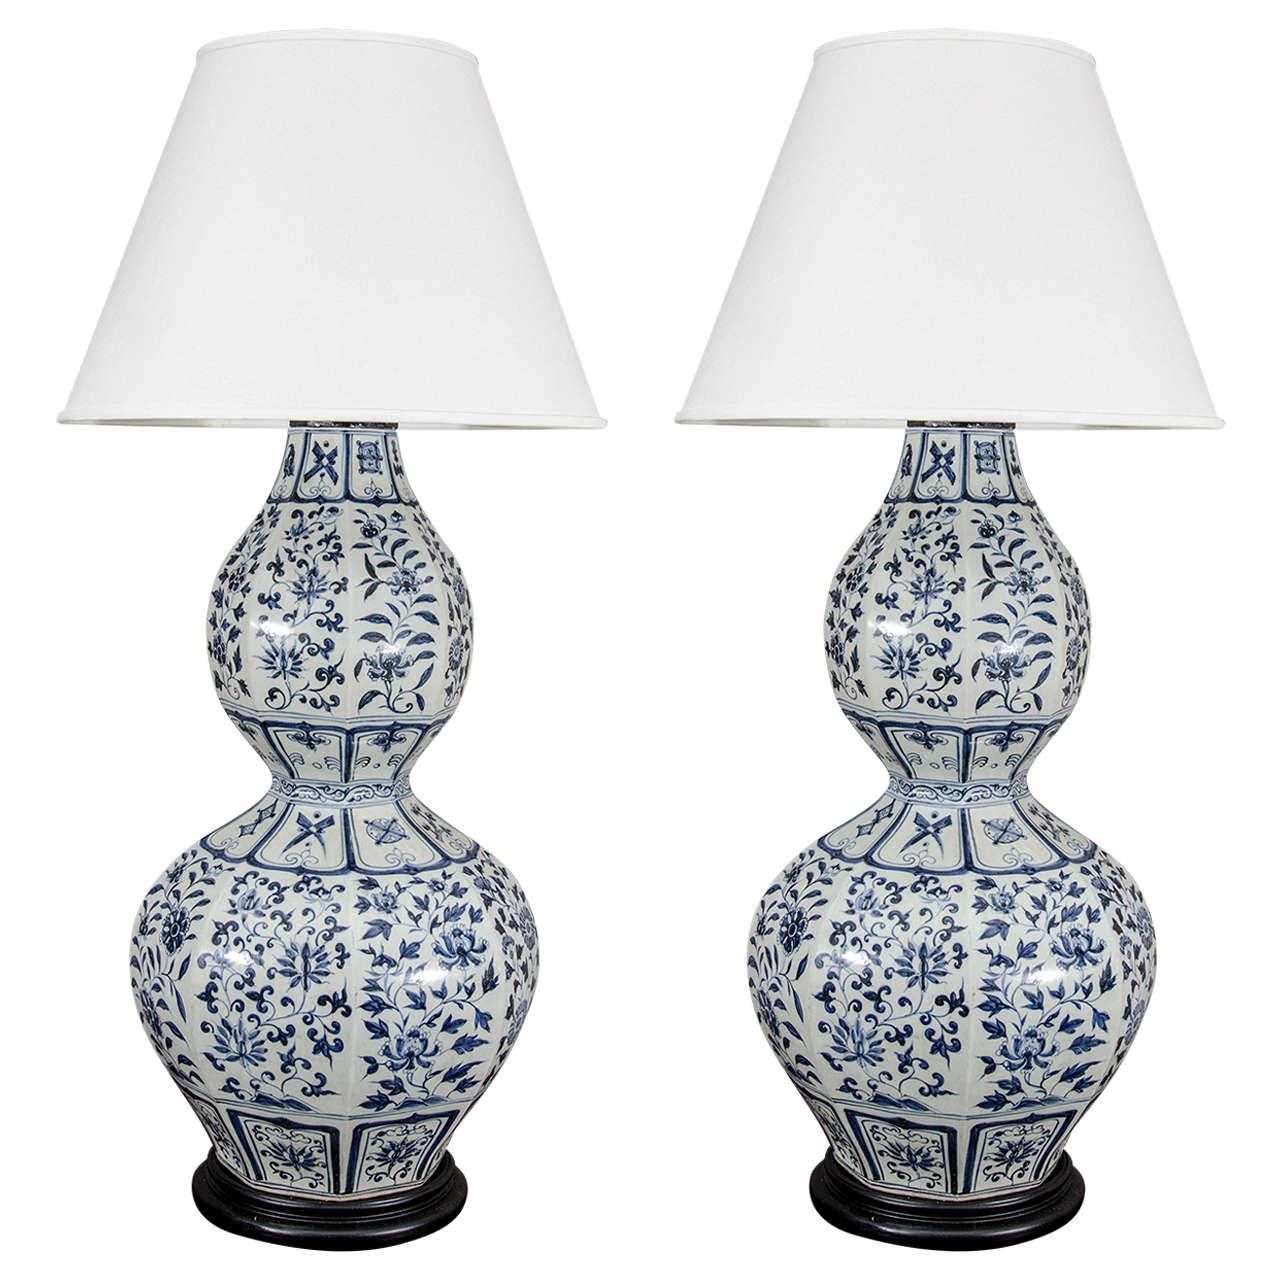 Pair of Large Chinese Blue and White Double Gourd Calabash Vases, Wired as Lamps